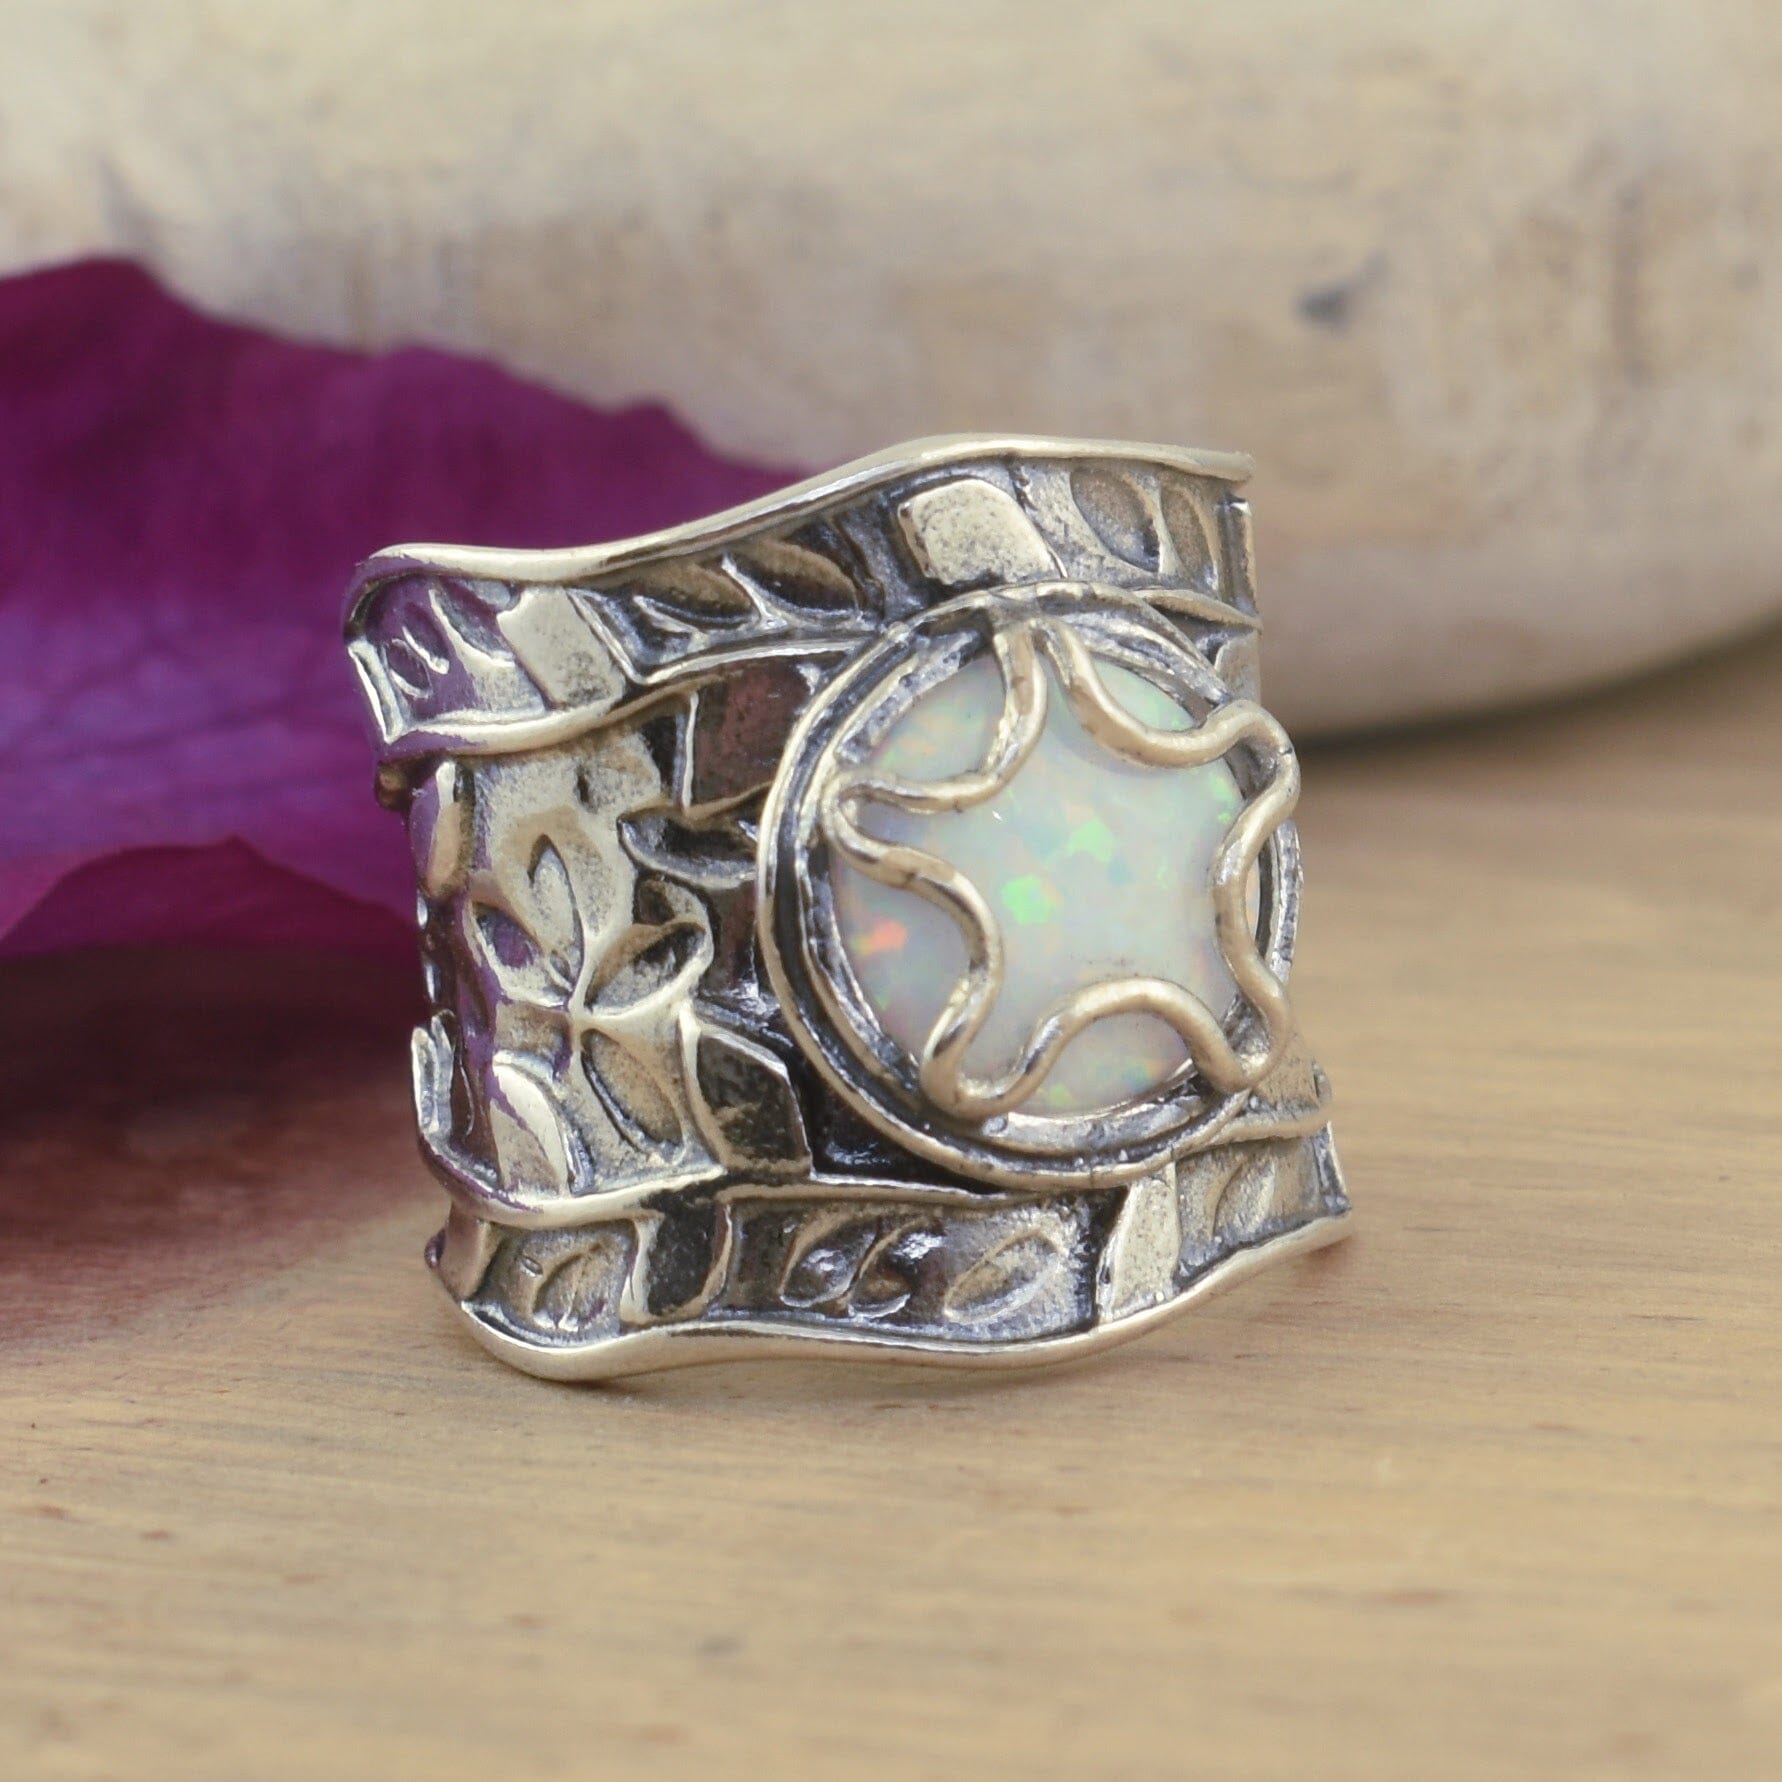 .925 sterling silver wide band ring with white opal stone